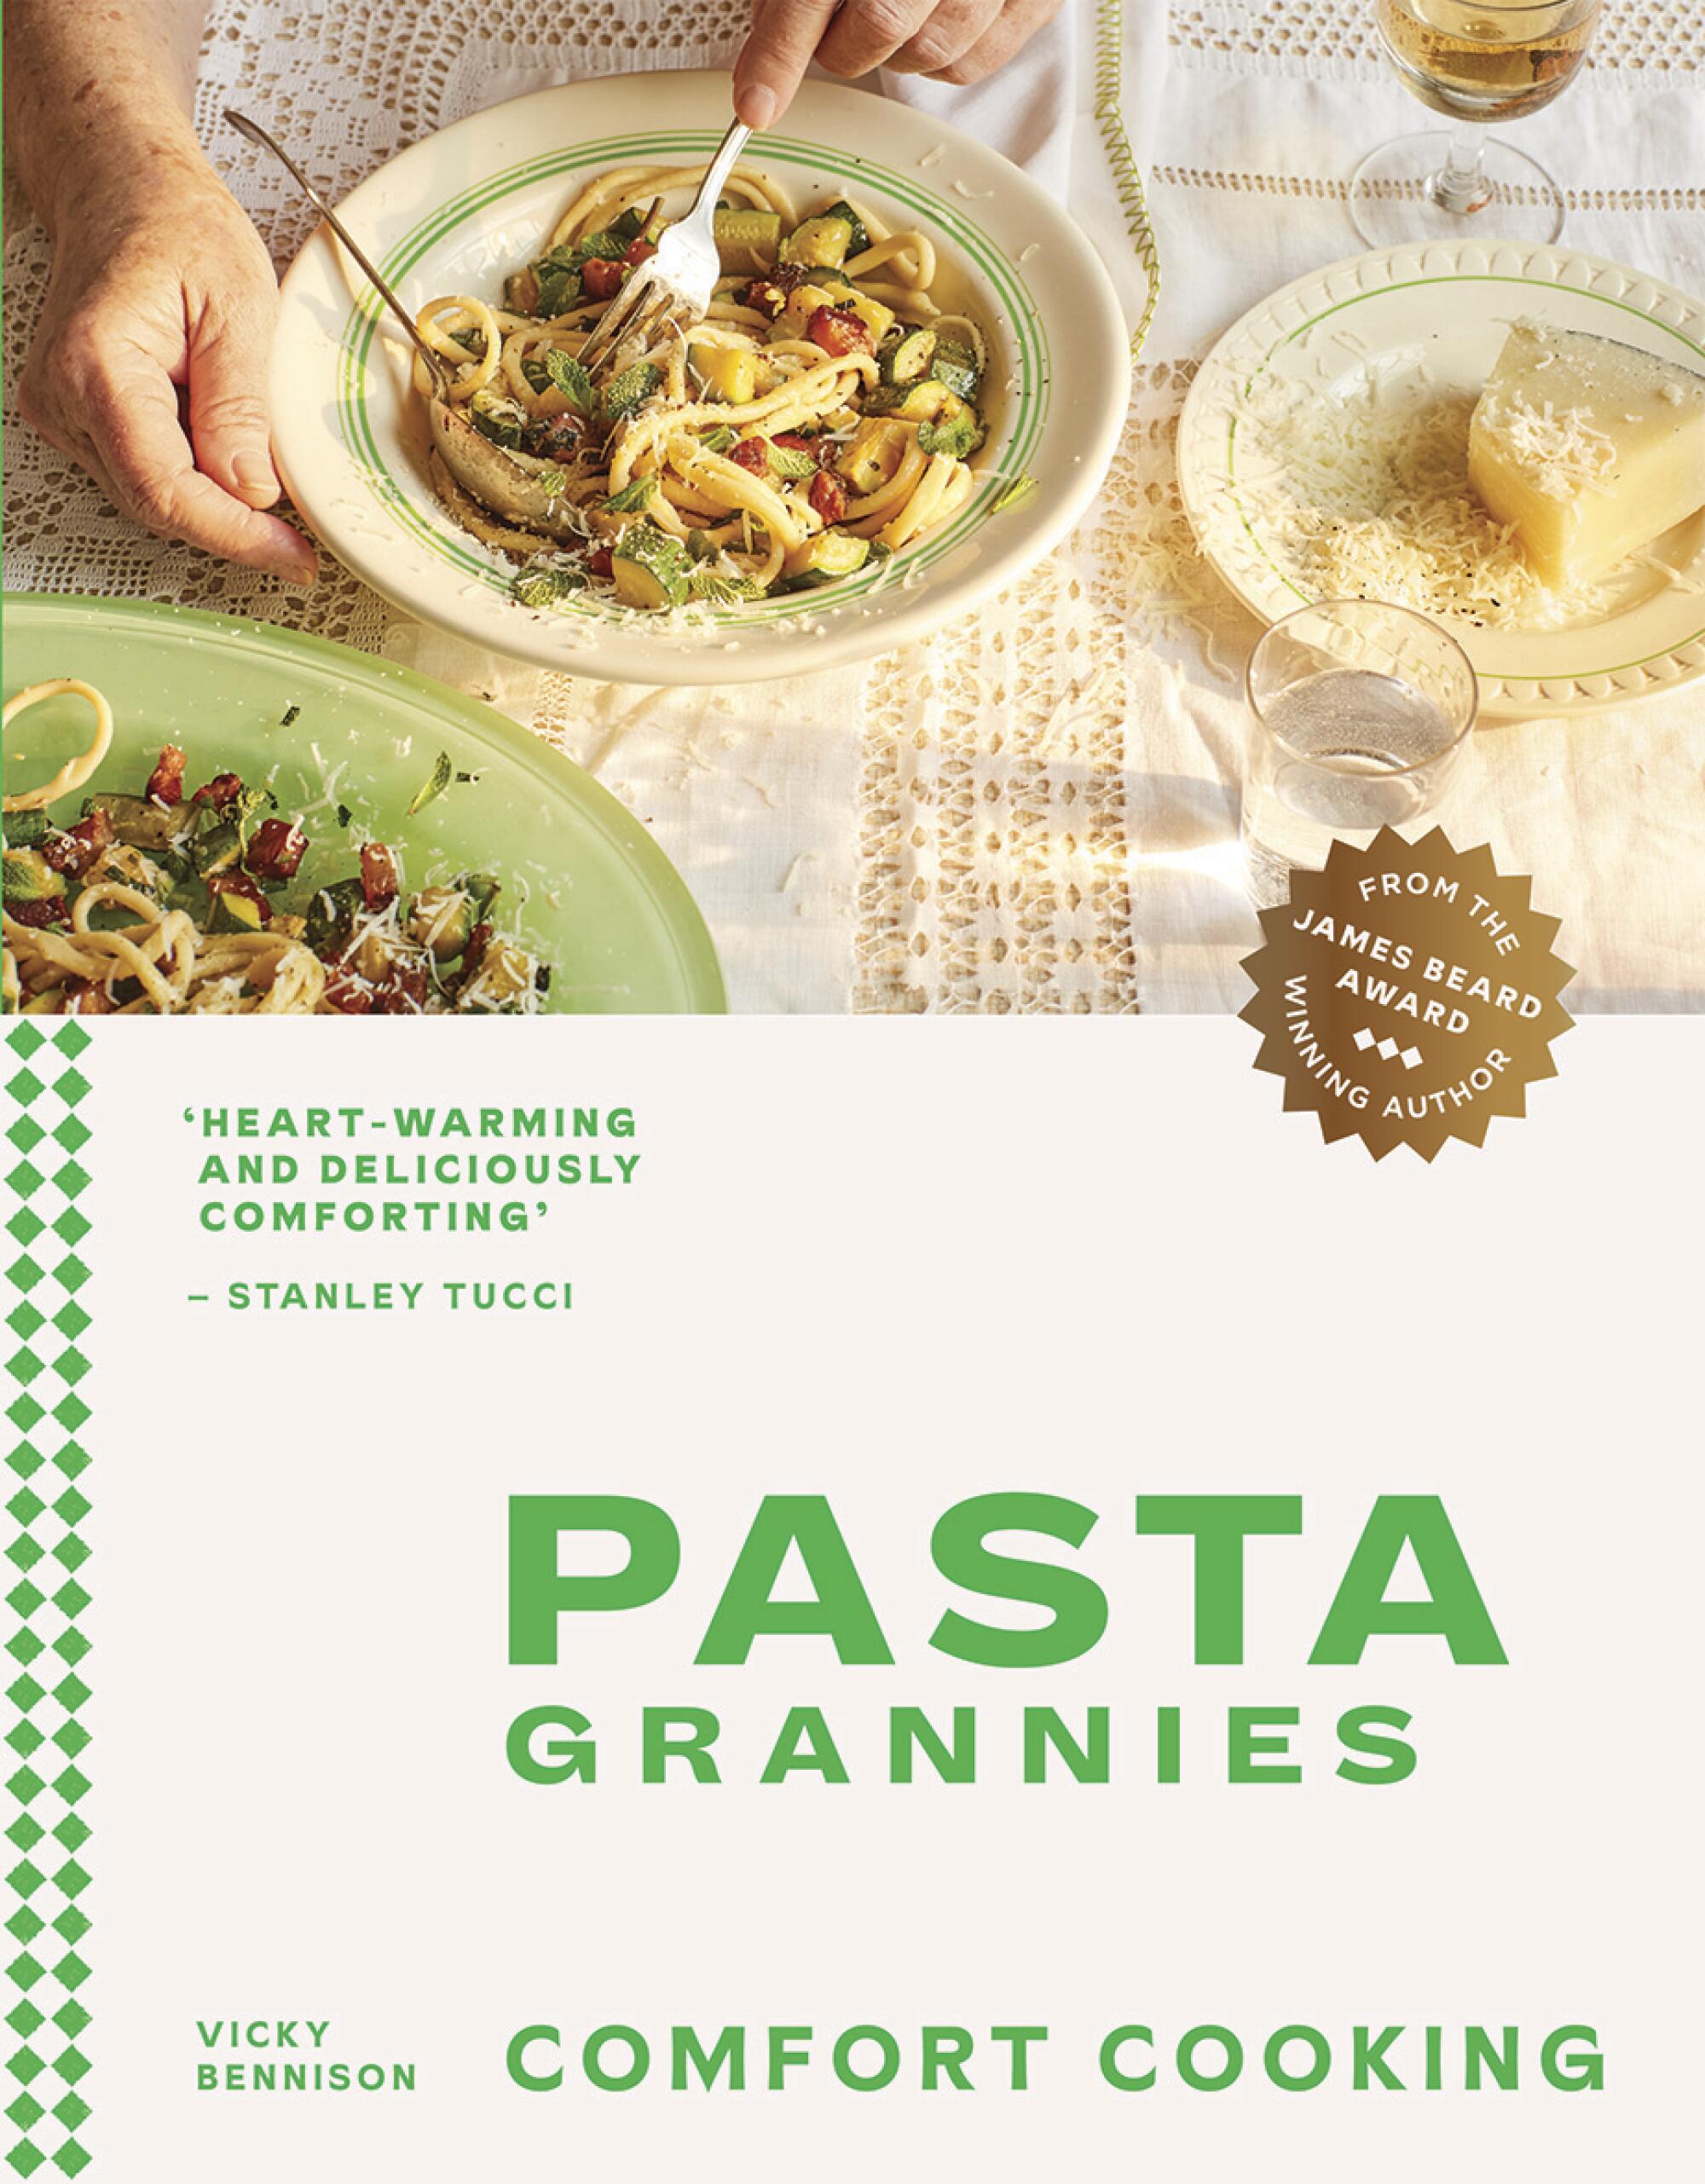 "Pasta Grannies: Comfort Cooking" by Vicky Bennison.